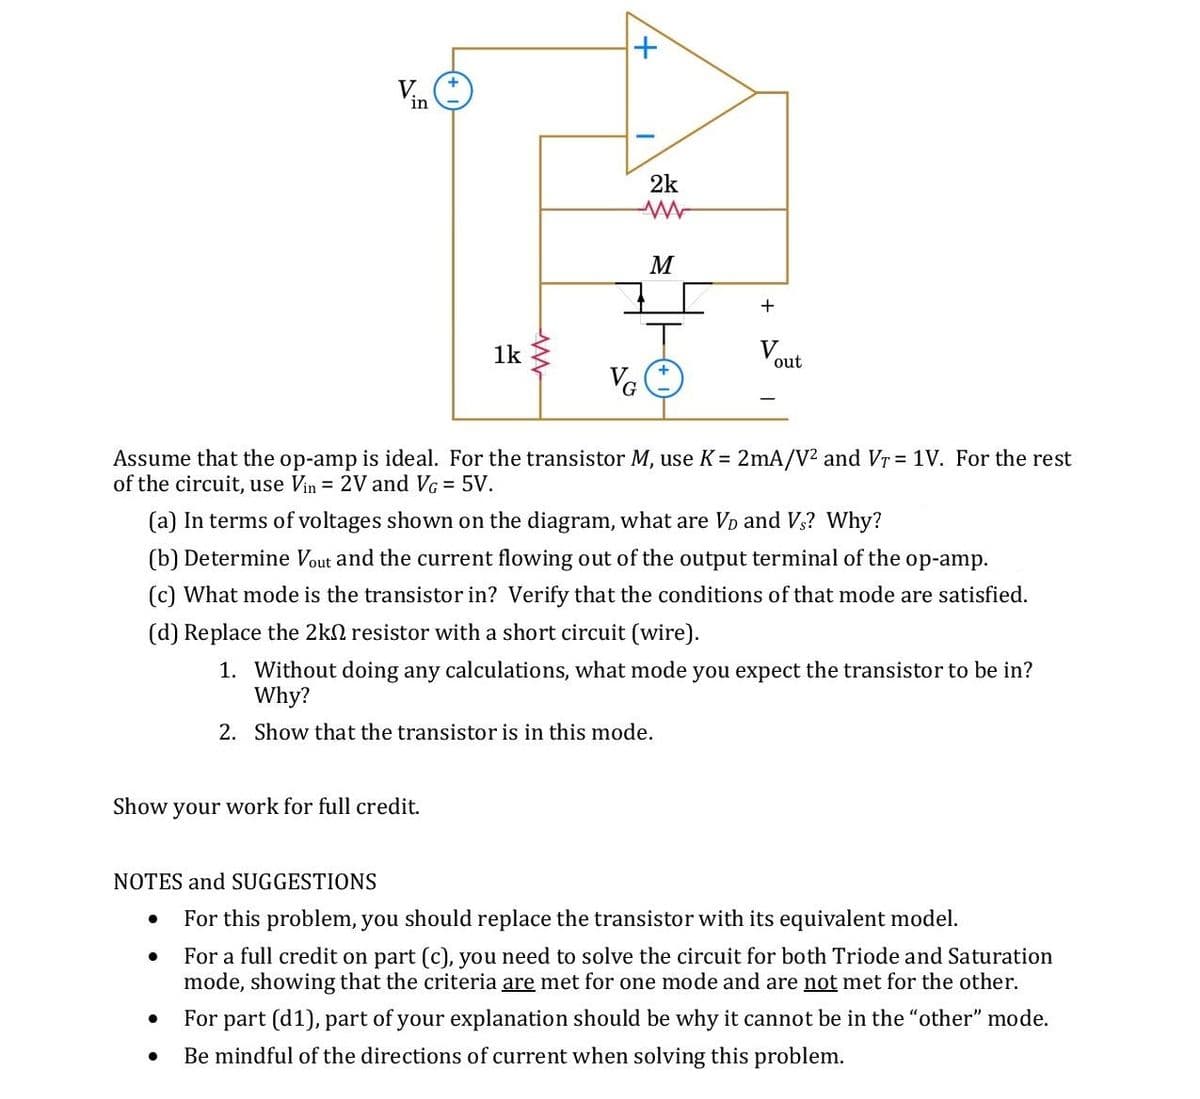 2k
M
+
1k
V
out
VG
Assume that the op-amp is ideal. For the transistor M, use K = 2mA/V? and Vr = 1V. For the rest
of the circuit, use Vin = 2V and VG = 5V.
(a) In terms of voltages shown on the diagram, what are Vp and V3? Why?
(b) Determine Vout and the current flowing out of the output terminal of the op-amp.
(c) What mode is the transistor in? Verify that the conditions of that mode are satisfied.
(d) Replace the 2kn resistor with a short circuit (wire).
1. Without doing any calculations, what mode you expect the transistor to be in?
Why?
2. Show that the transistor is in this mode.
Show your work for full credit.
NOTES and SUGGESTIONS
For this problem, you should replace the transistor with its equivalent model.
For a full credit on part (c), you need to solve the circuit for both Triode and Saturation
mode, showing that the criteria are met for one mode and are not met for the other.
For part (d1), part of your explanation should be why it cannot be in the "other" mode.
Be mindful of the directions of current when solving this problem.
